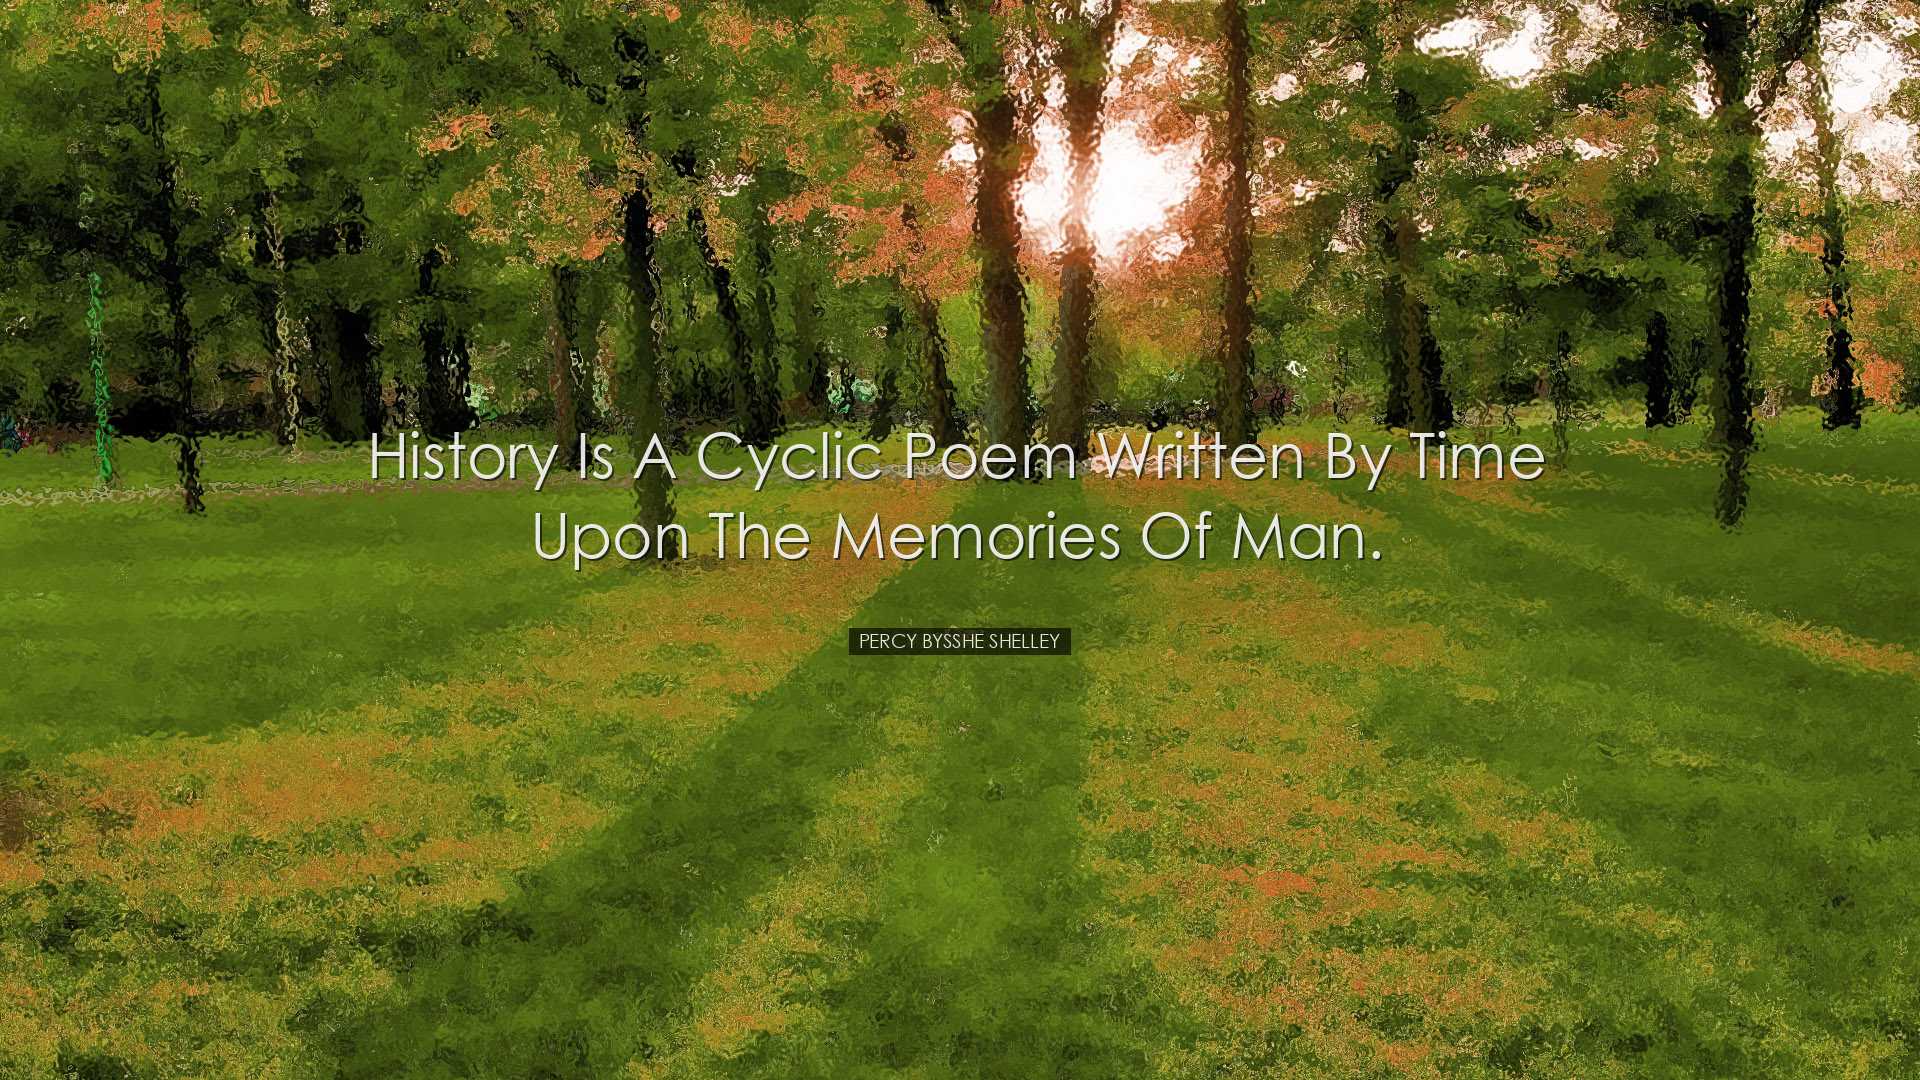 History is a cyclic poem written by Time upon the memories of man.